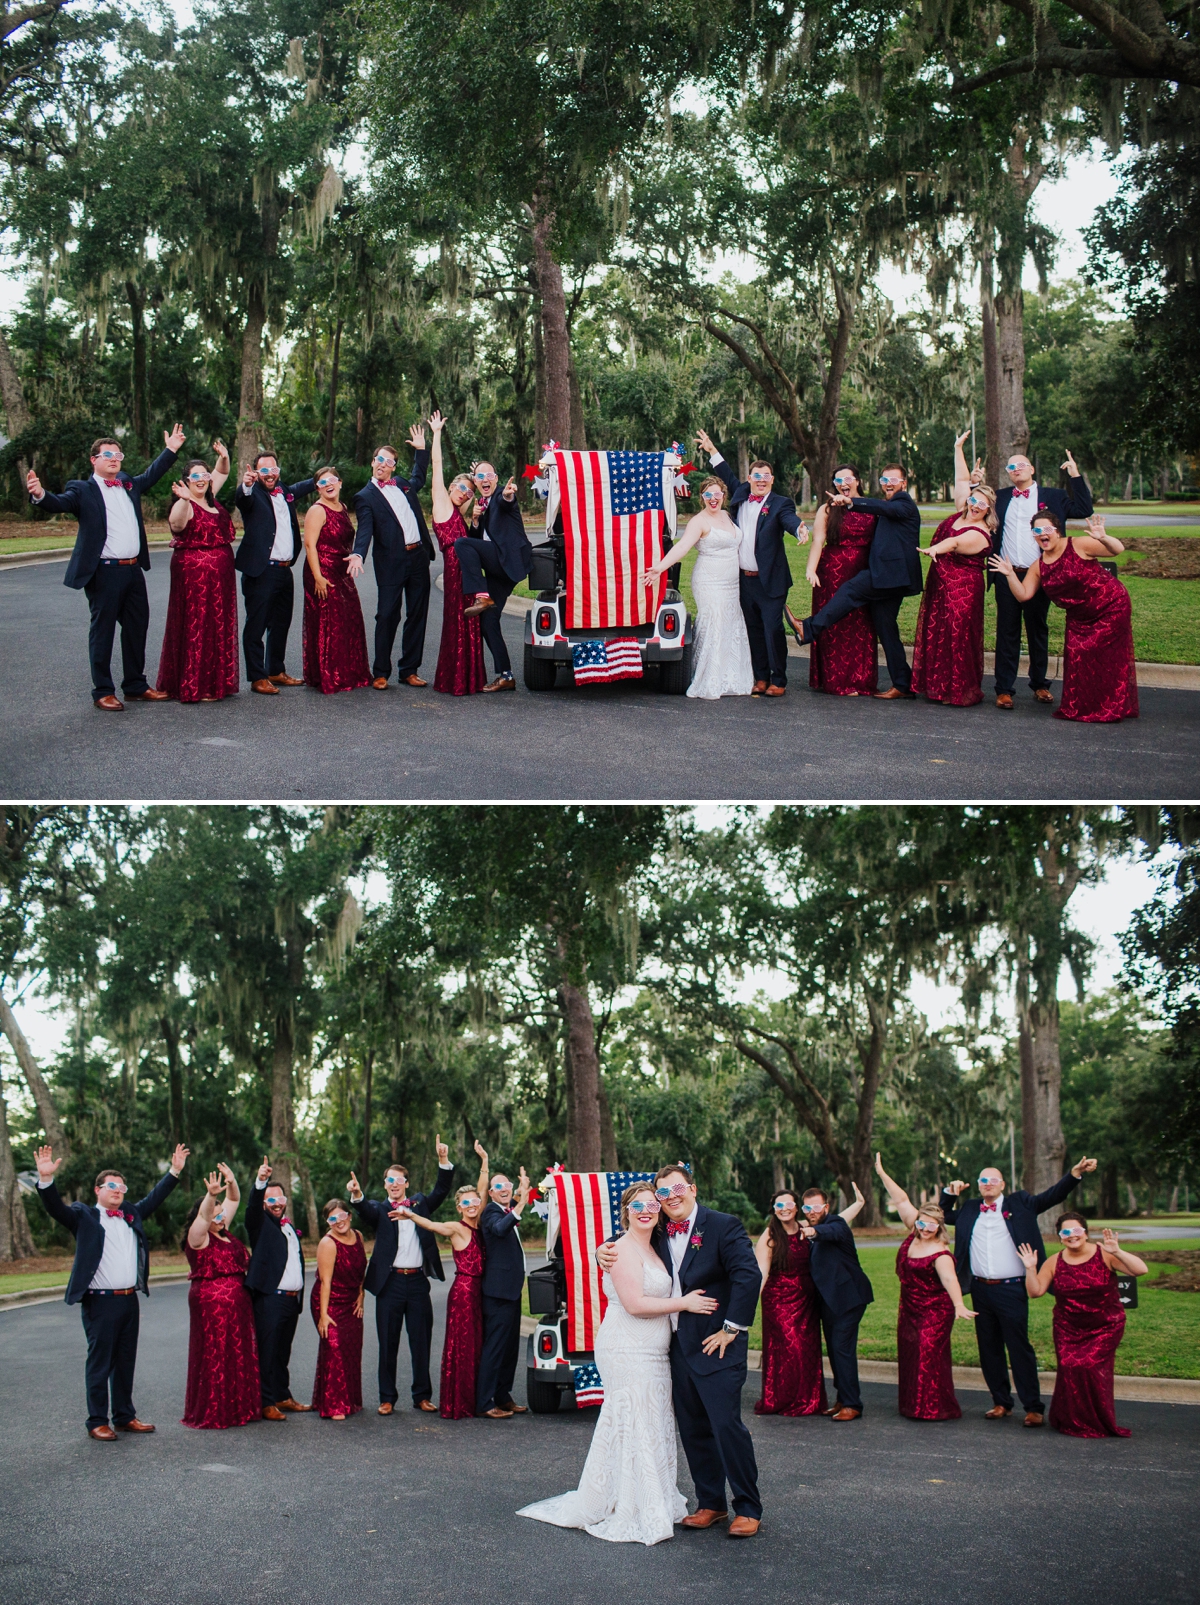 Bridesmaids in burgundy sequin gowns - Izzy Hudgins Photography